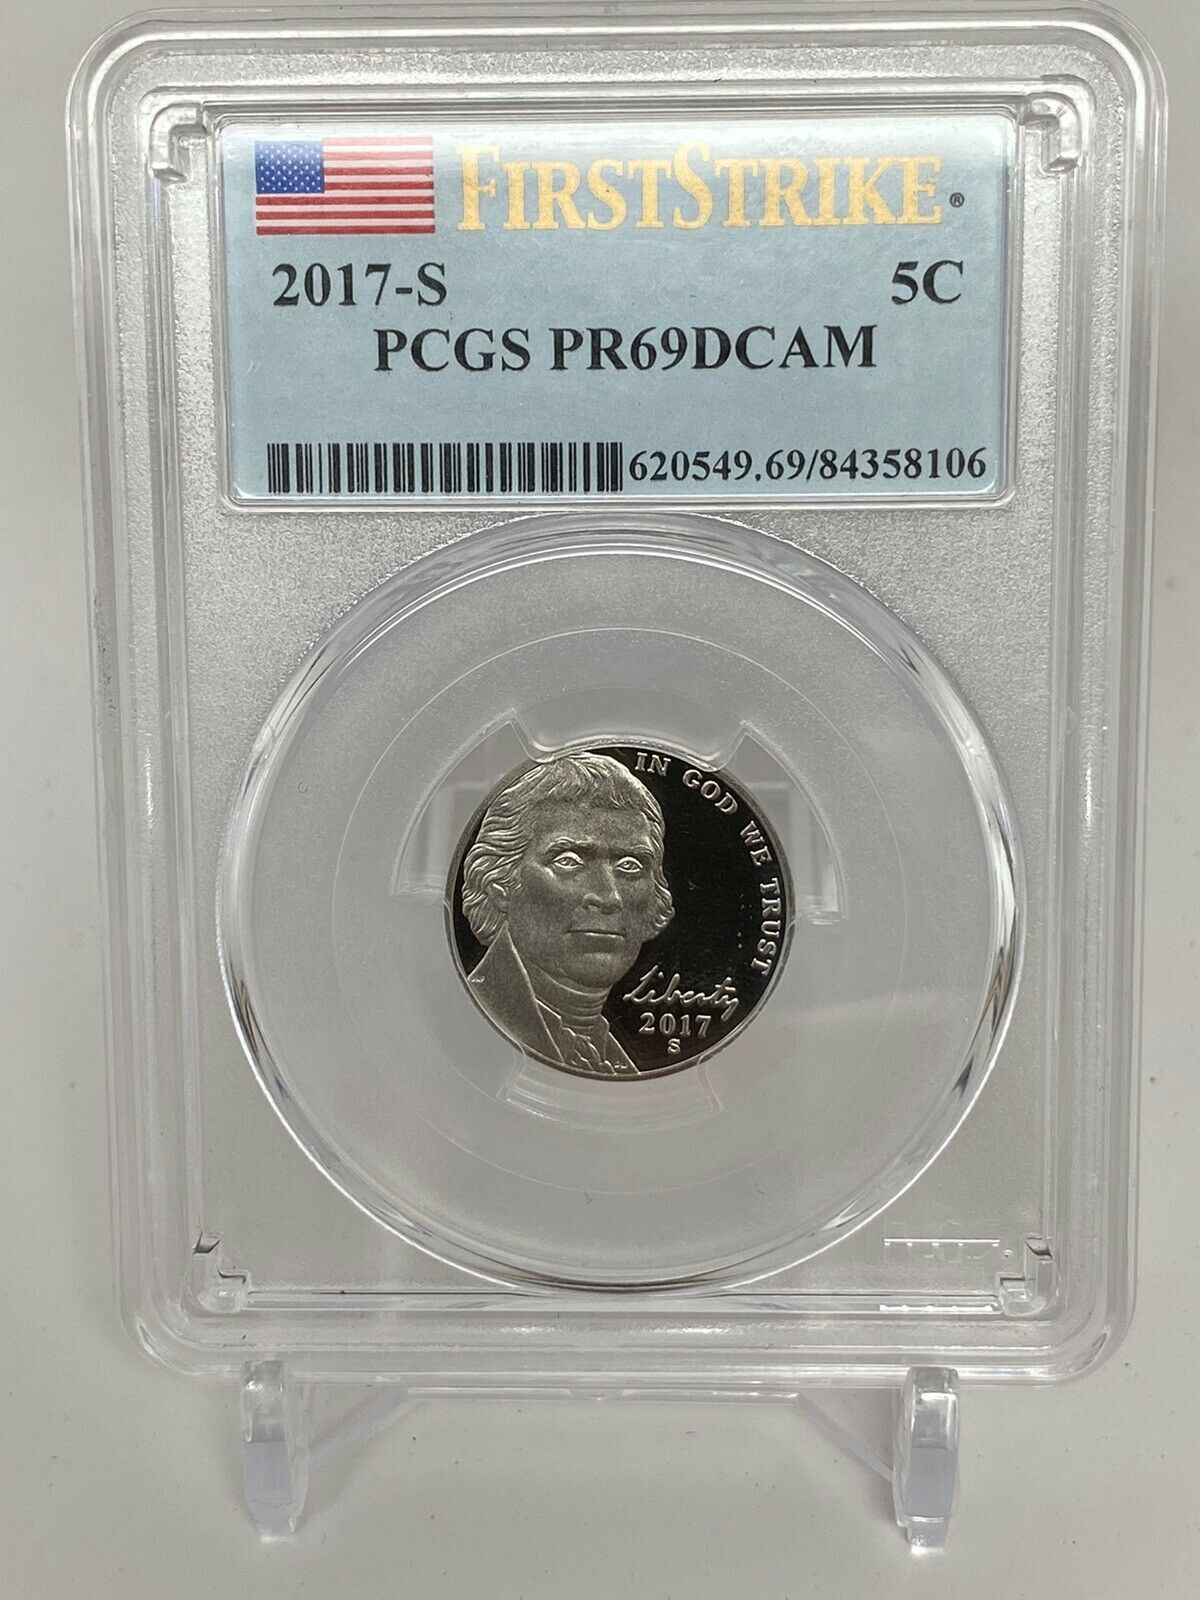 Primary image for 2017 S Jefferson Nickel PCGS Proof PR69DCAM First Strike  20200074